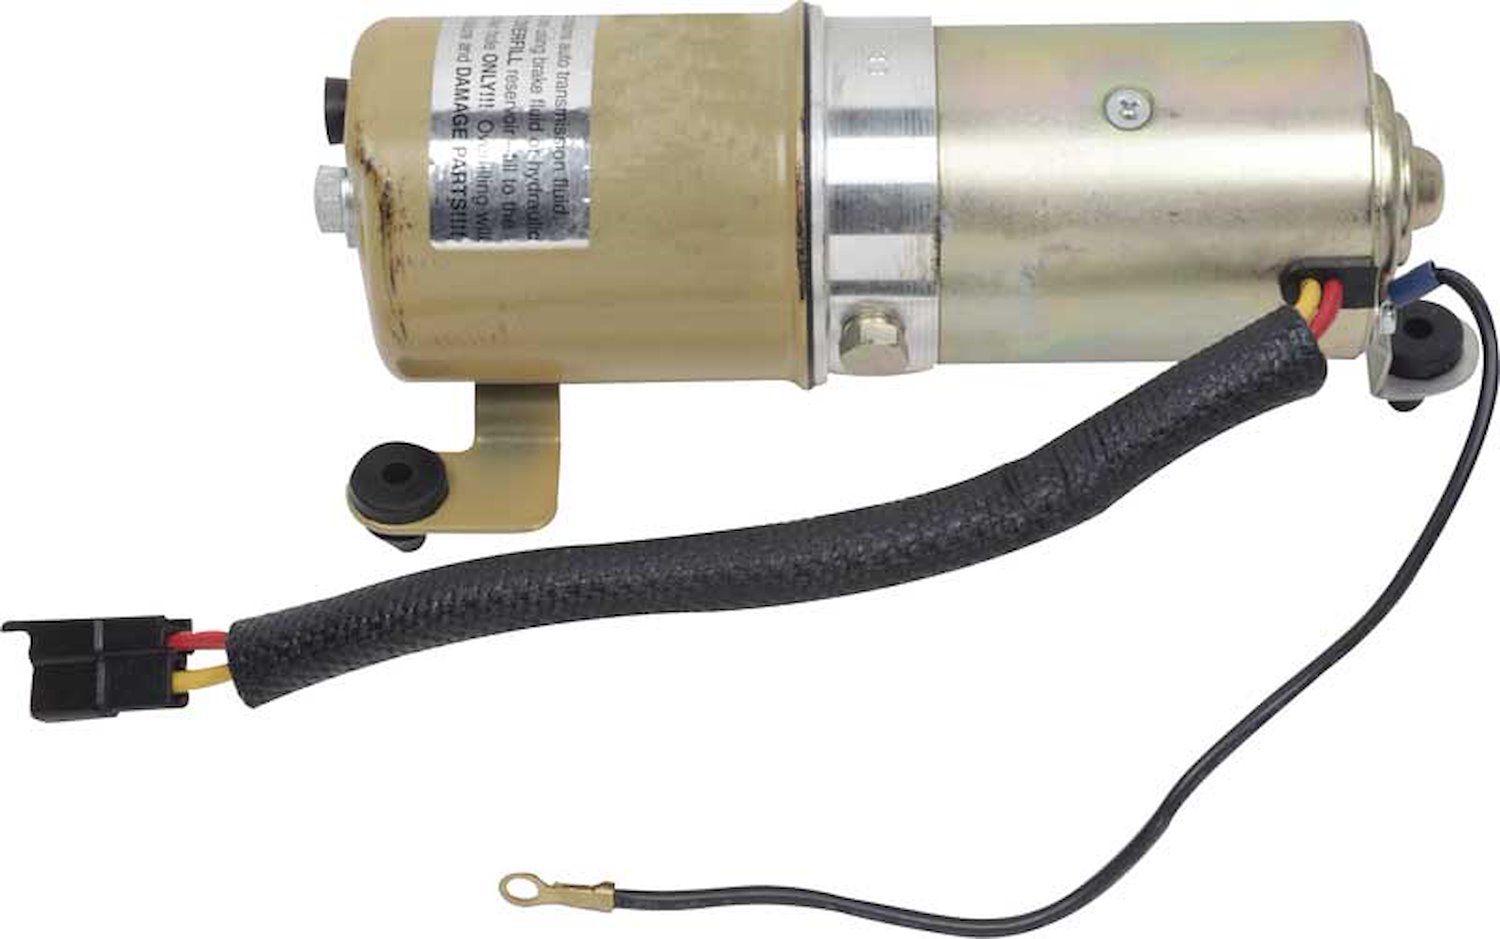 HK238 Convertible Top Motor Pump Assembly 1963-64 Buick, Cadillac, Chevy, Pontiac, Oldsmobile; Universal Fit; Full Size Models